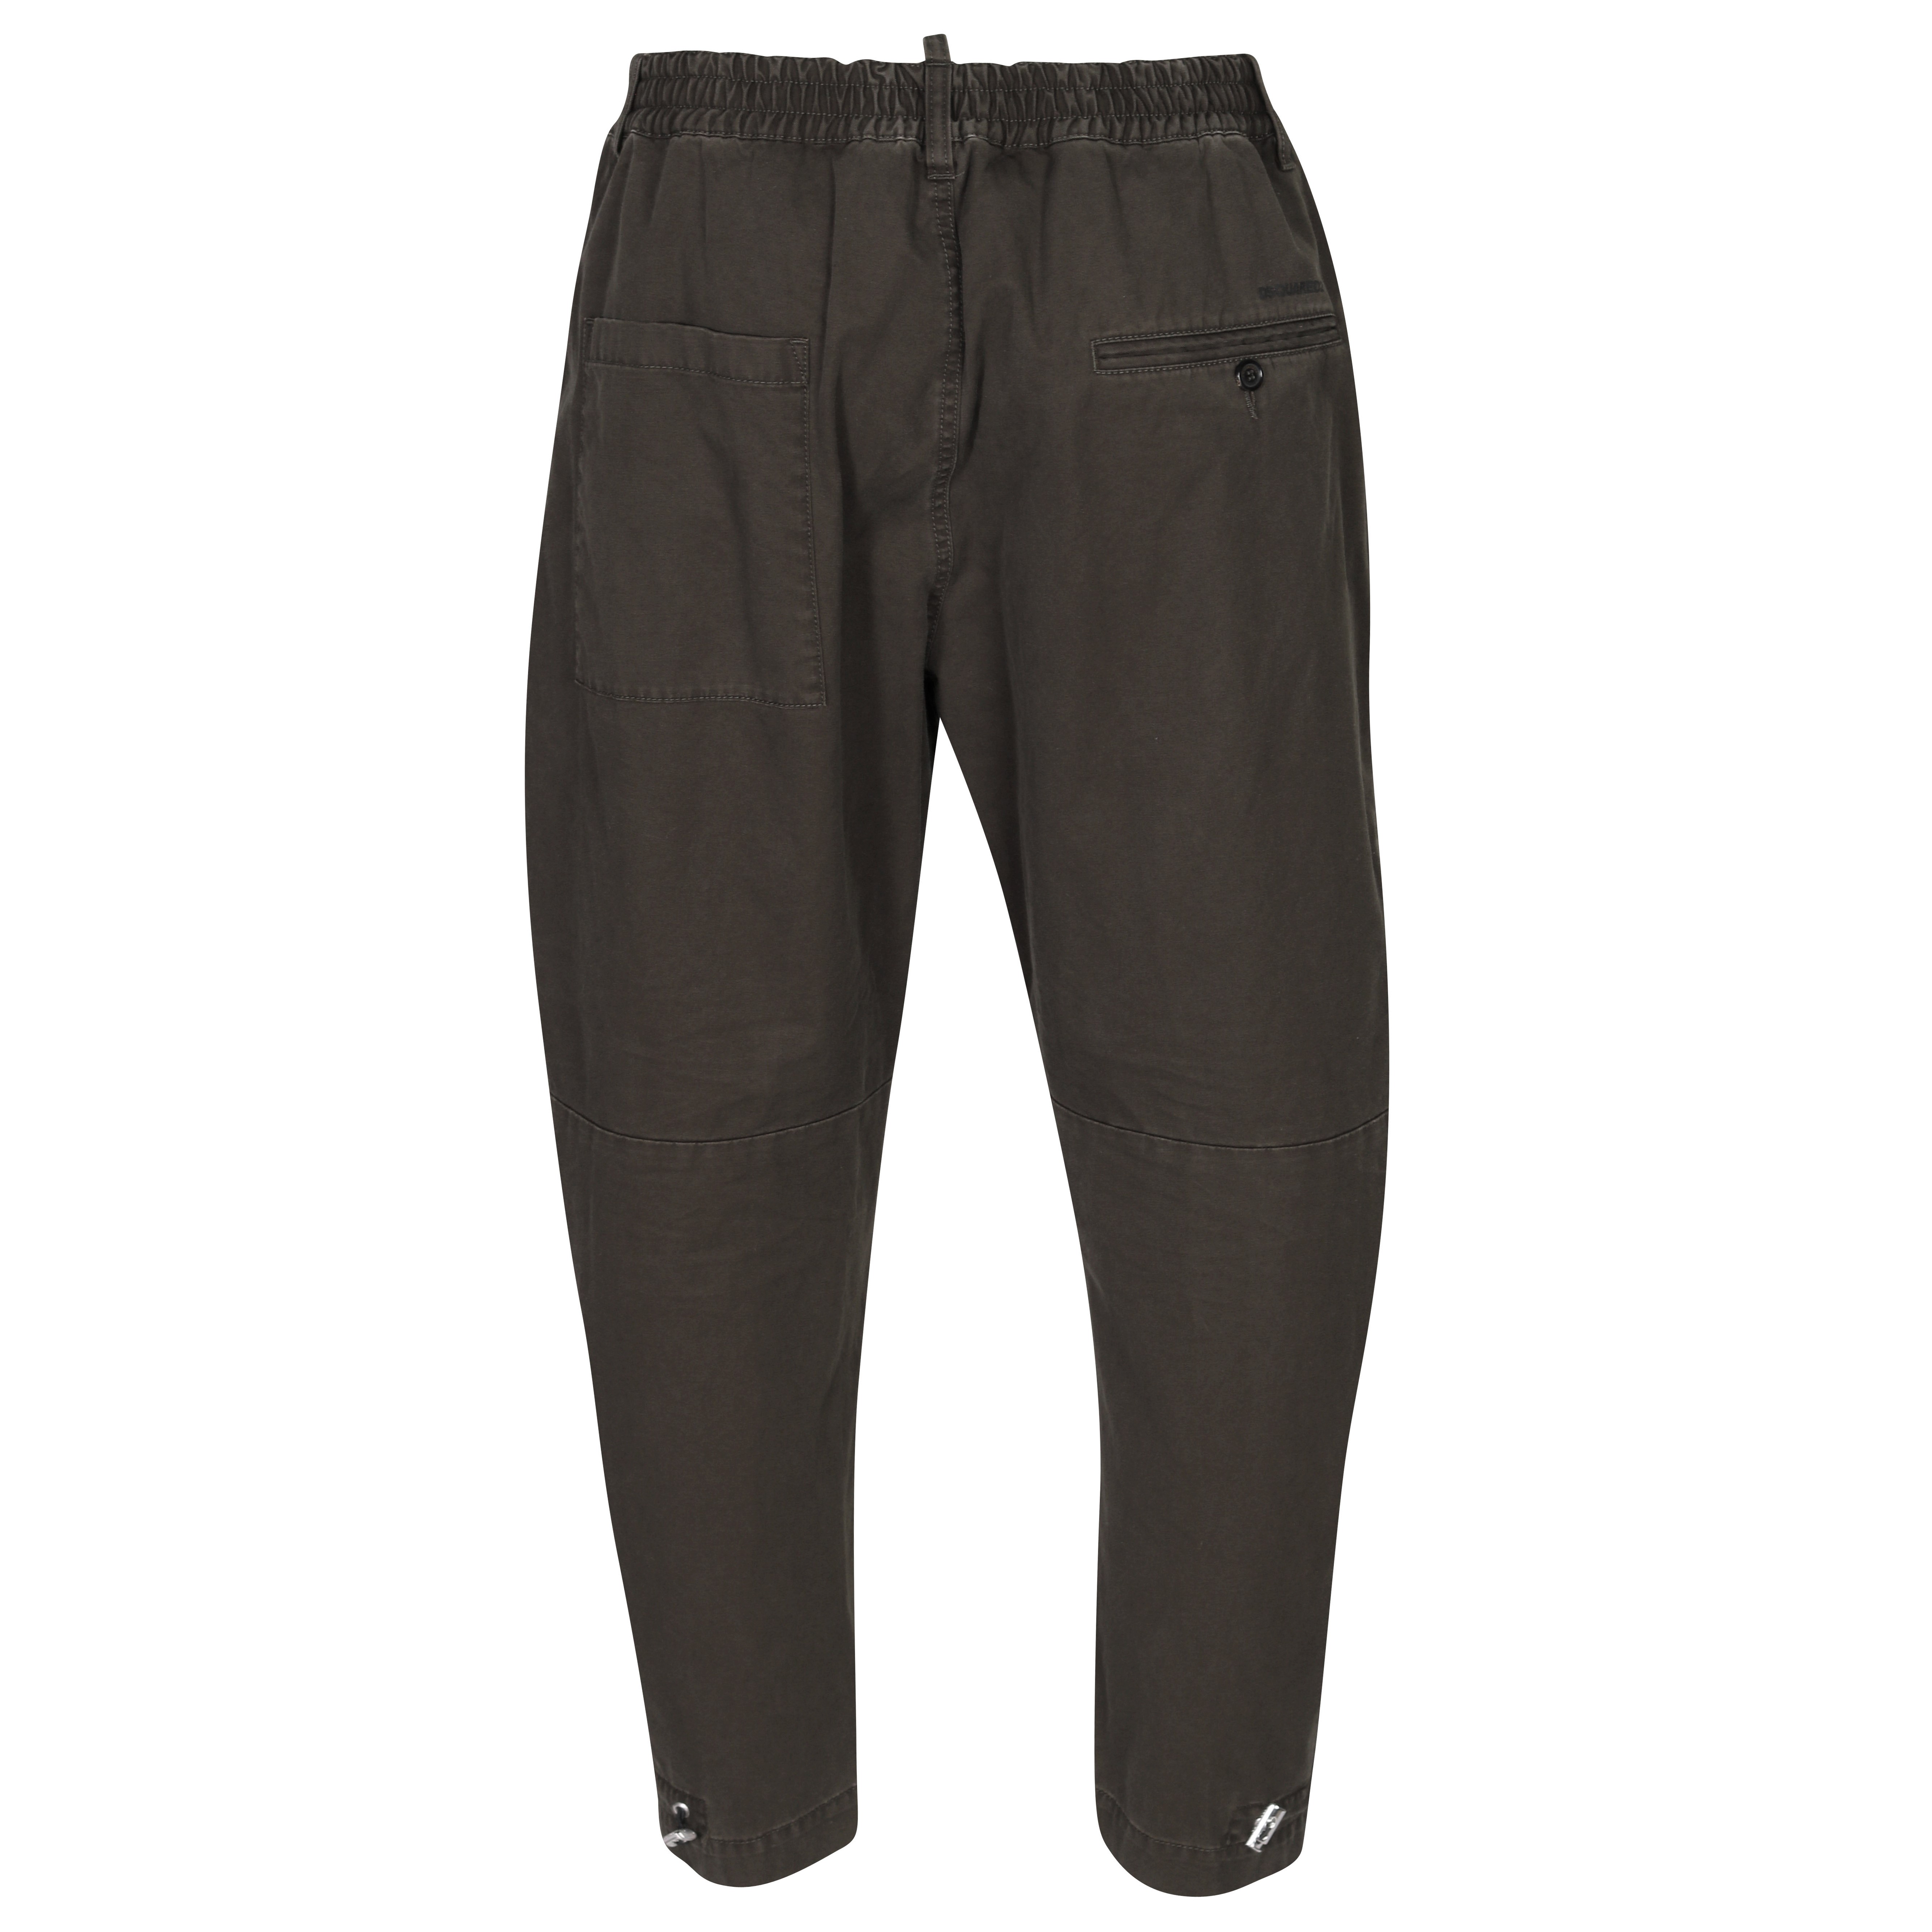 Dsquared Pully Pant in Dark Olive 48